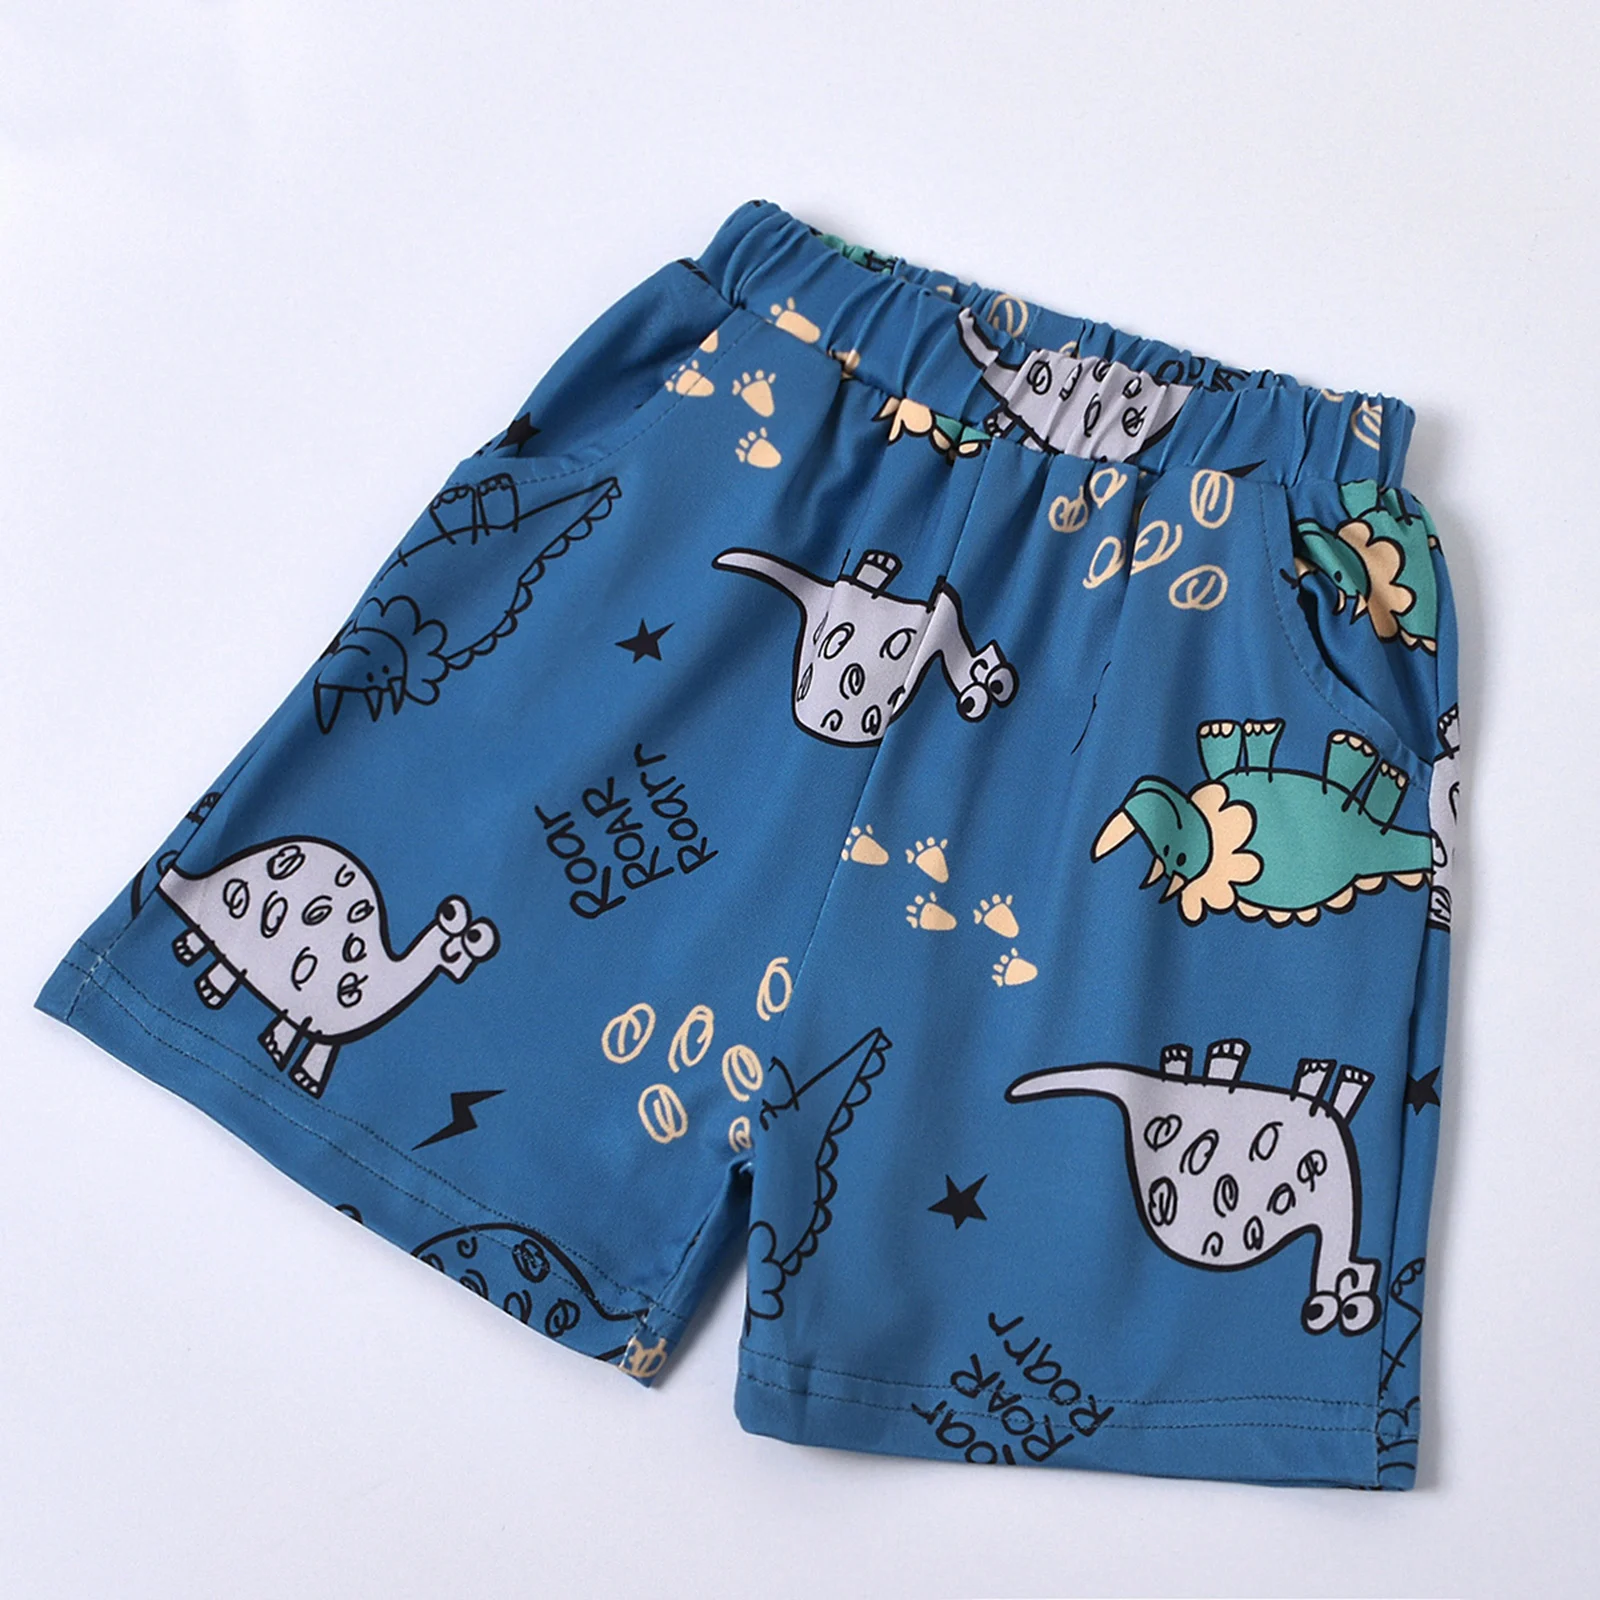 

OPPERIAYA 2Pc Baby Boys Casual Summer Brother Outfit Dinosaur Letter Print Round Neck T-shirts Or Tanks Tops Shorts with Pockets